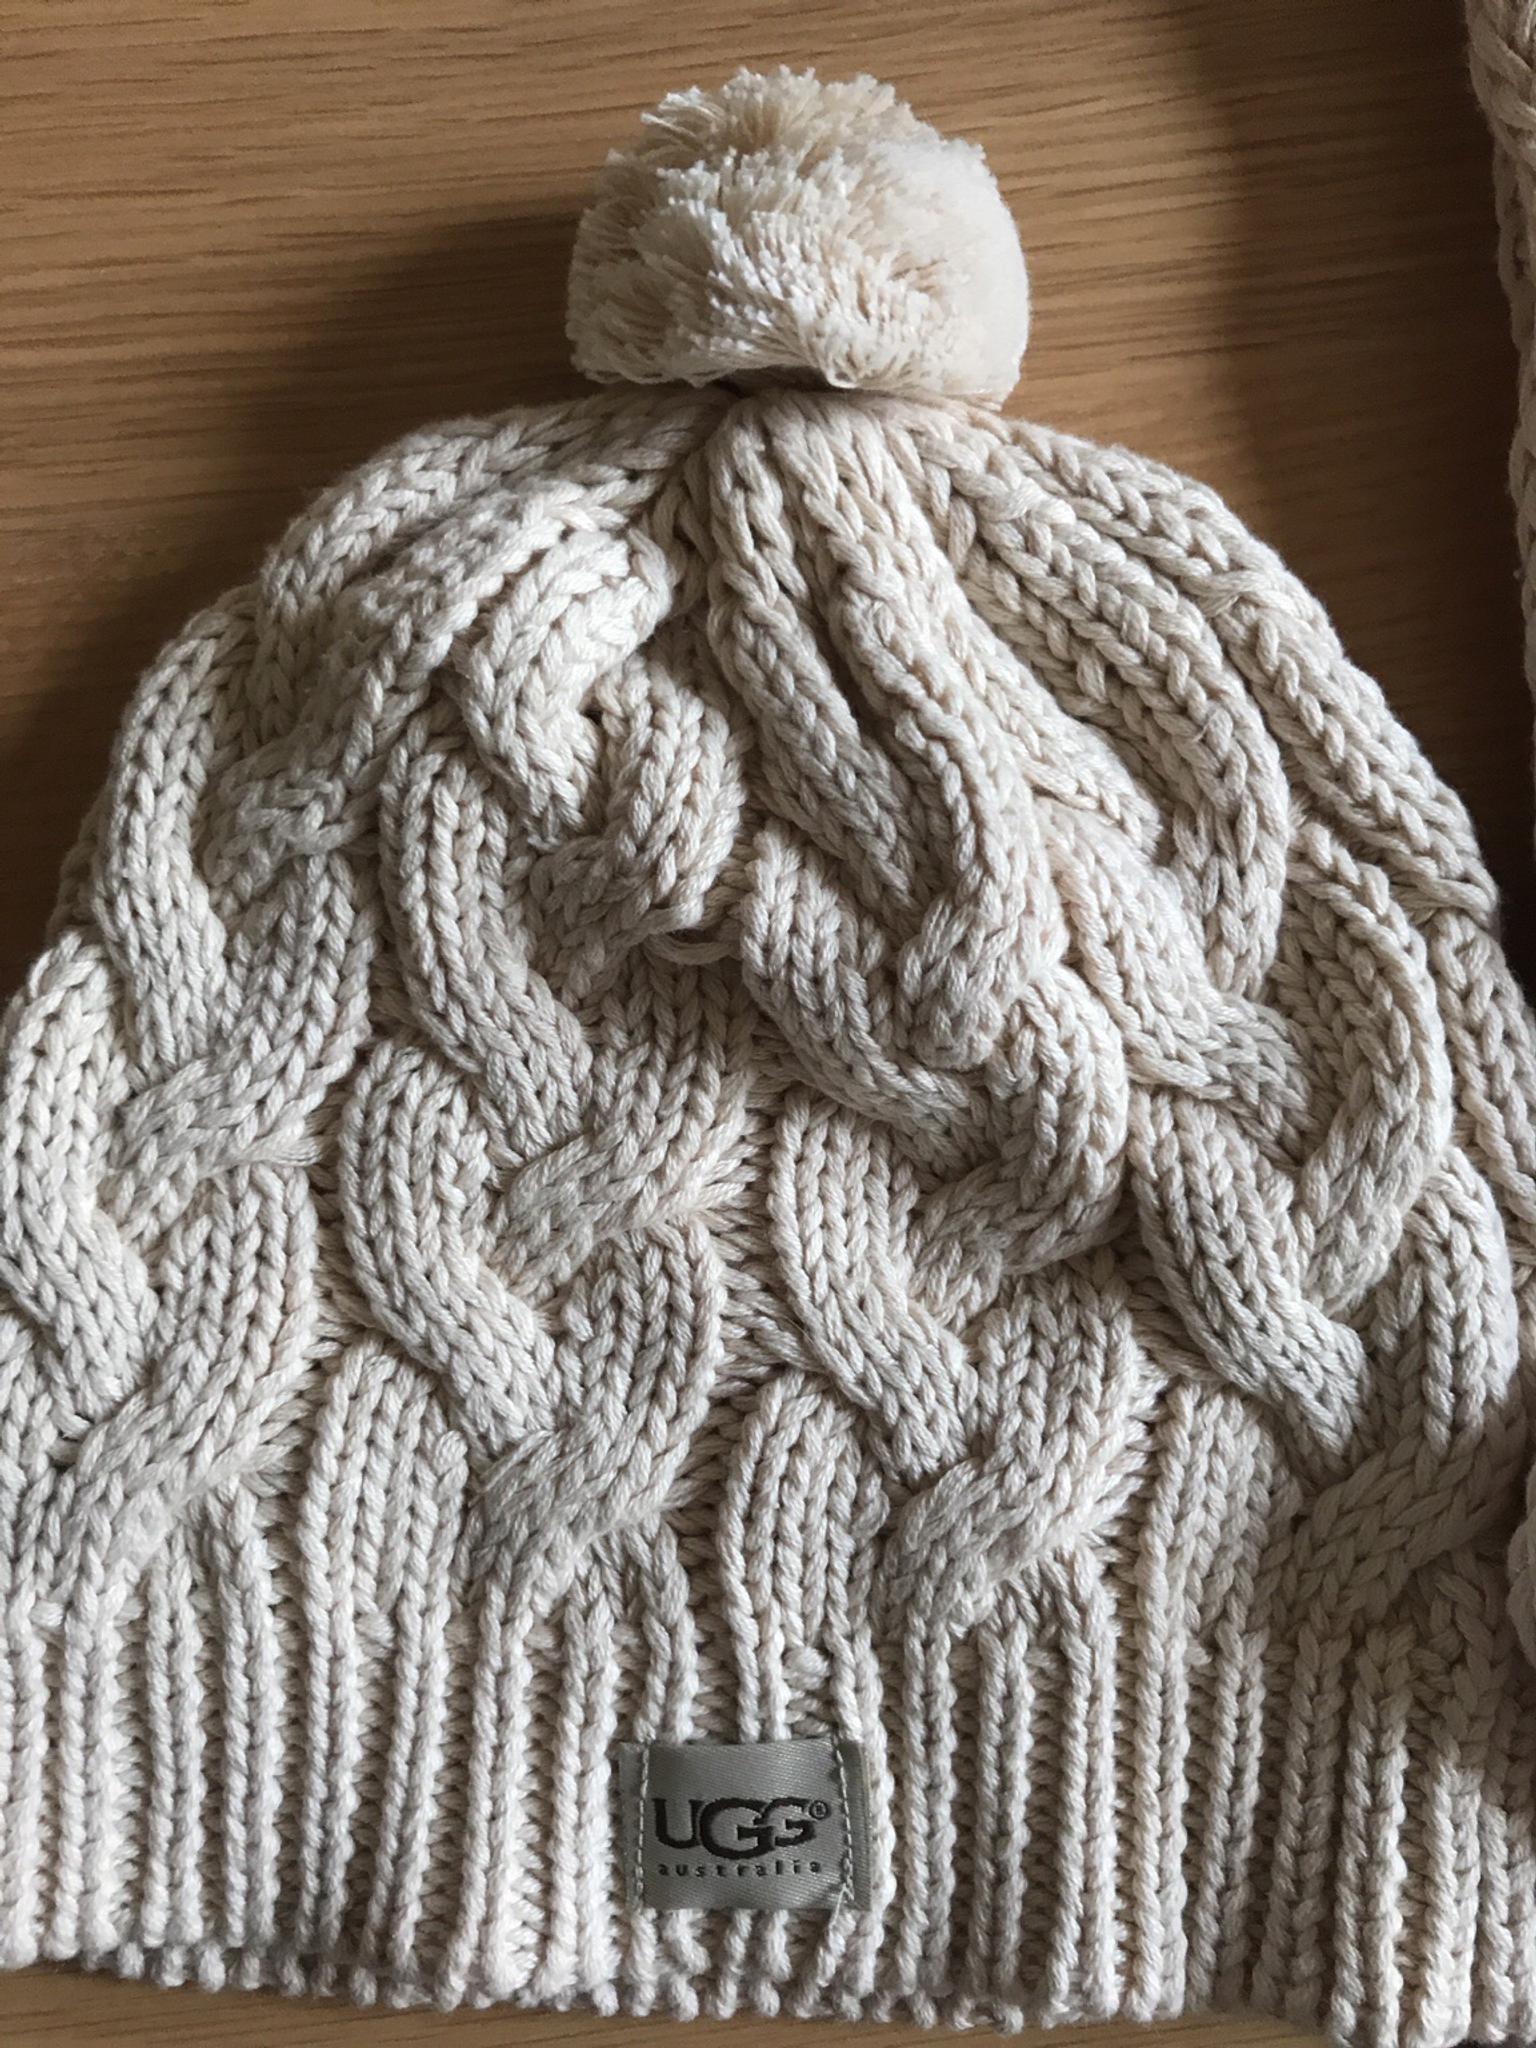 ugg hat and scarf set sale